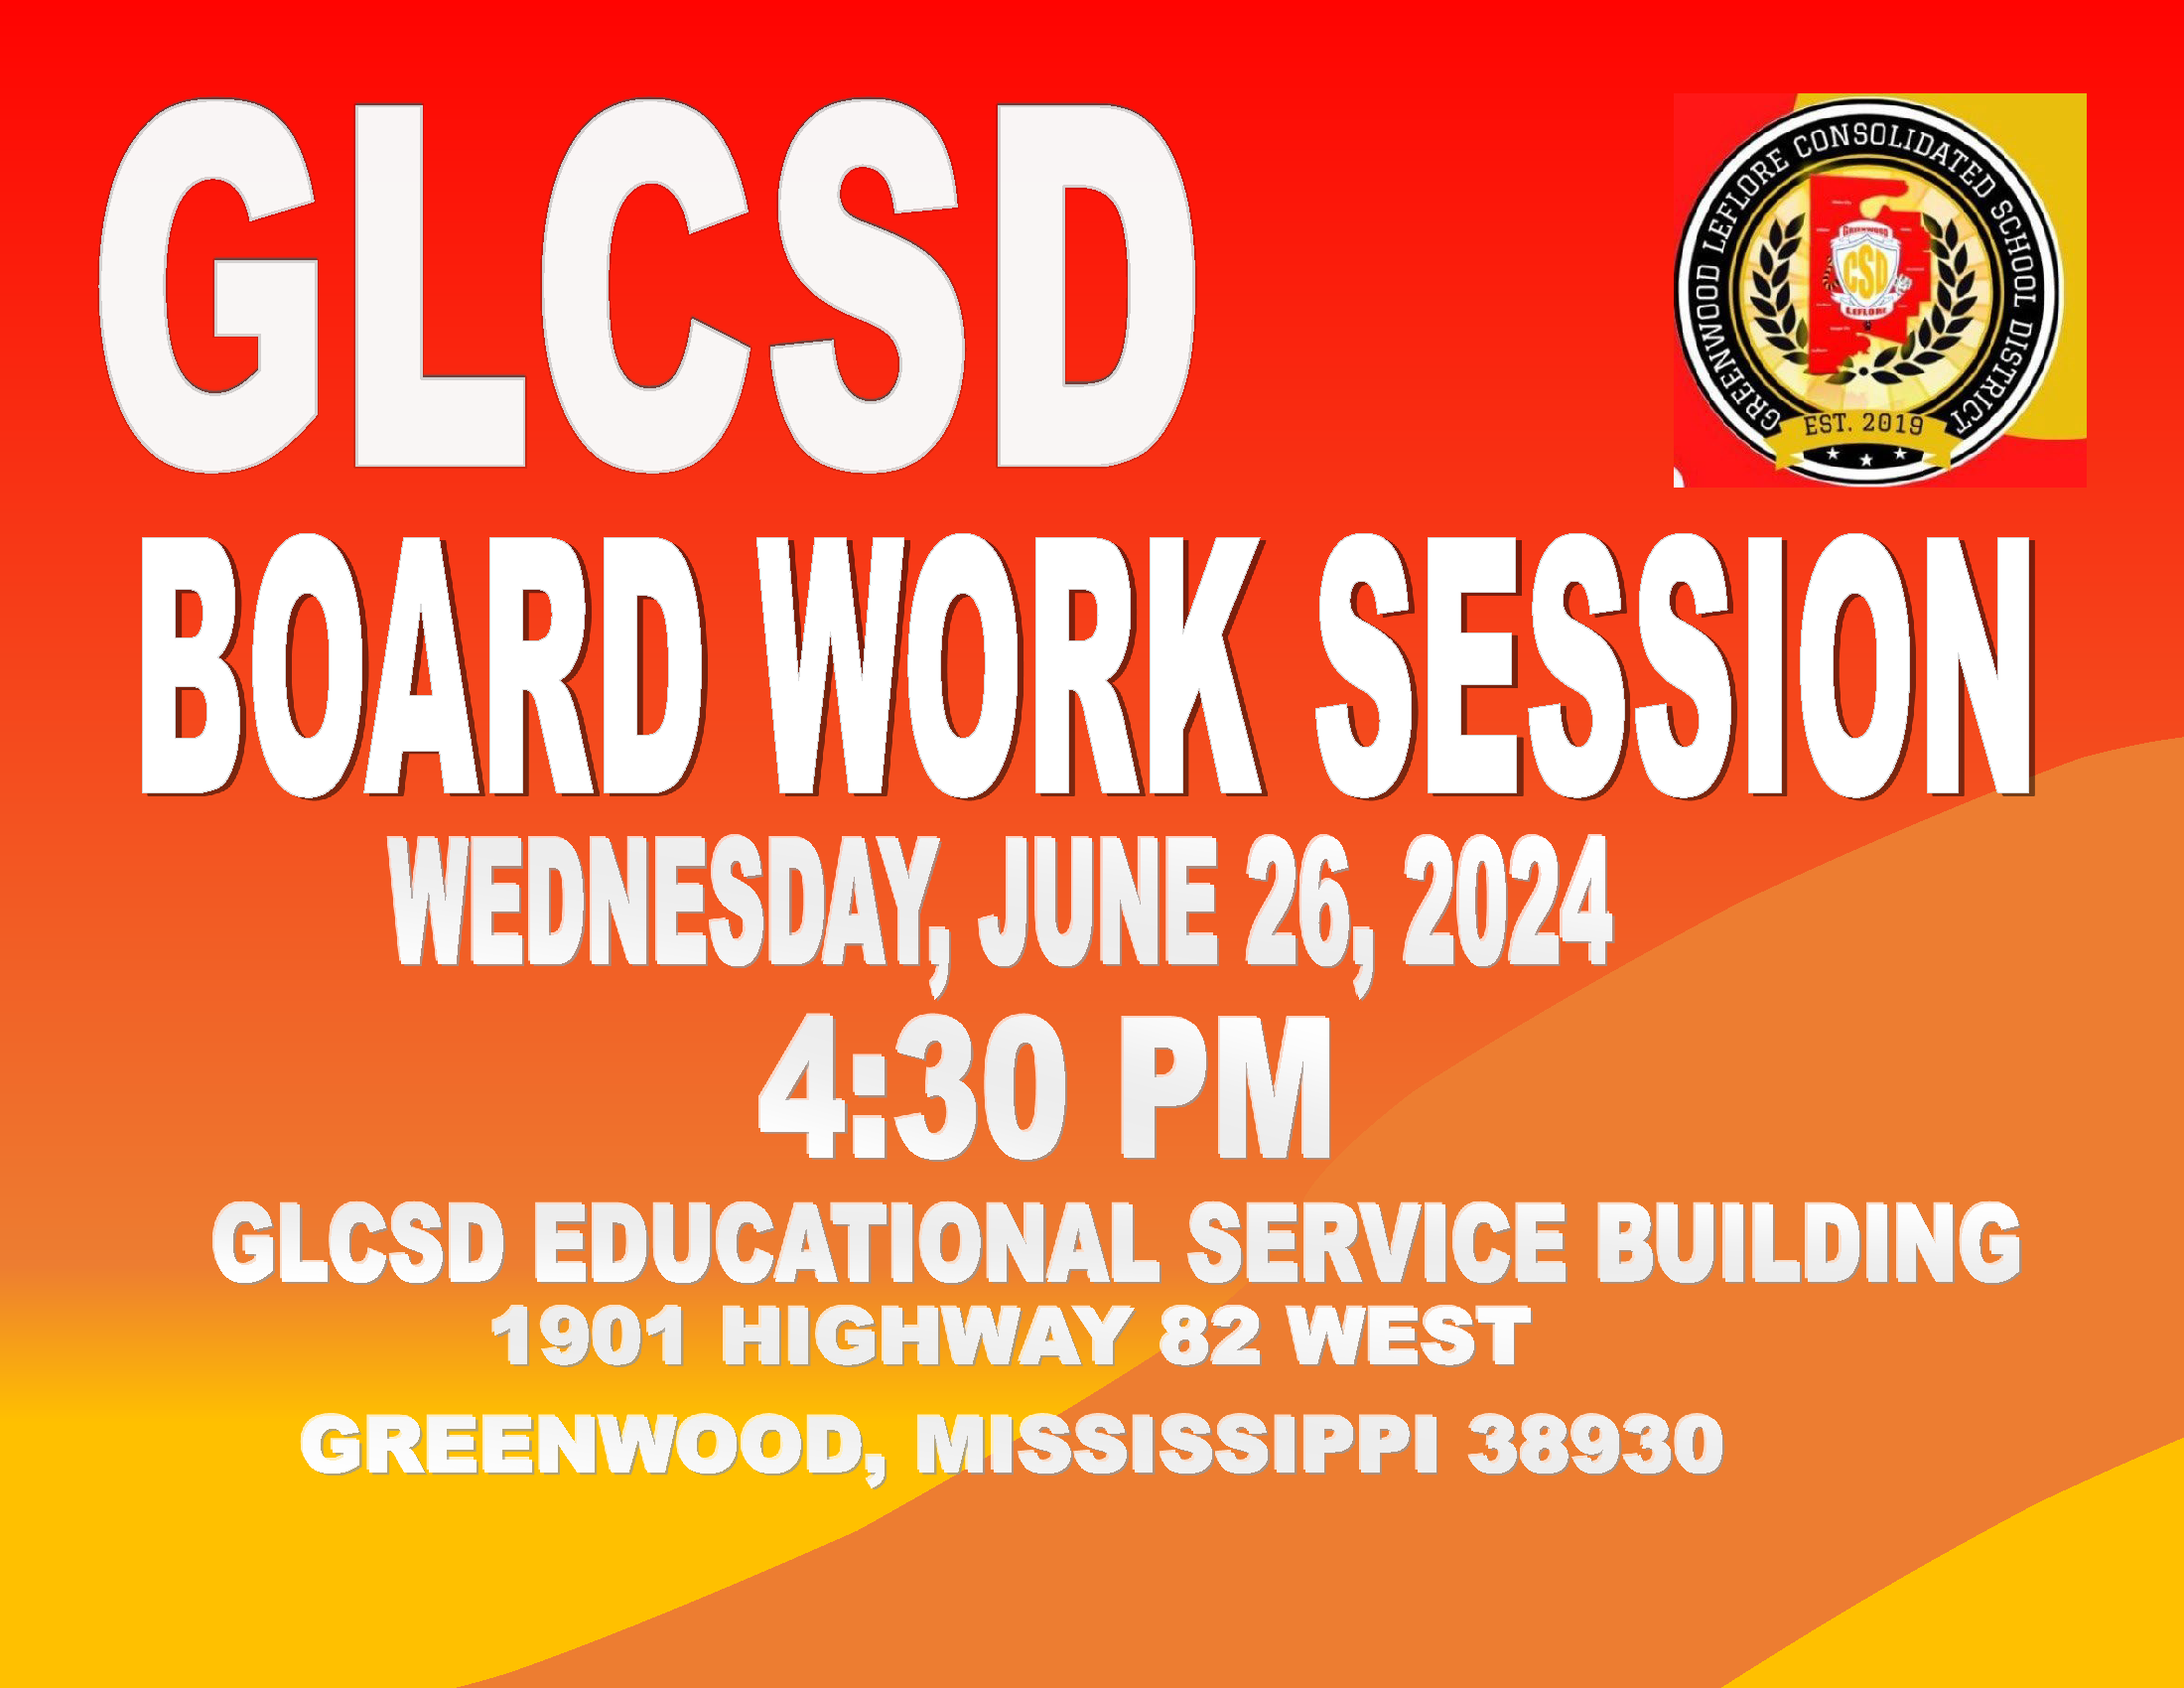 Board Work Session will be held June 26, 2024 at 4:30pm